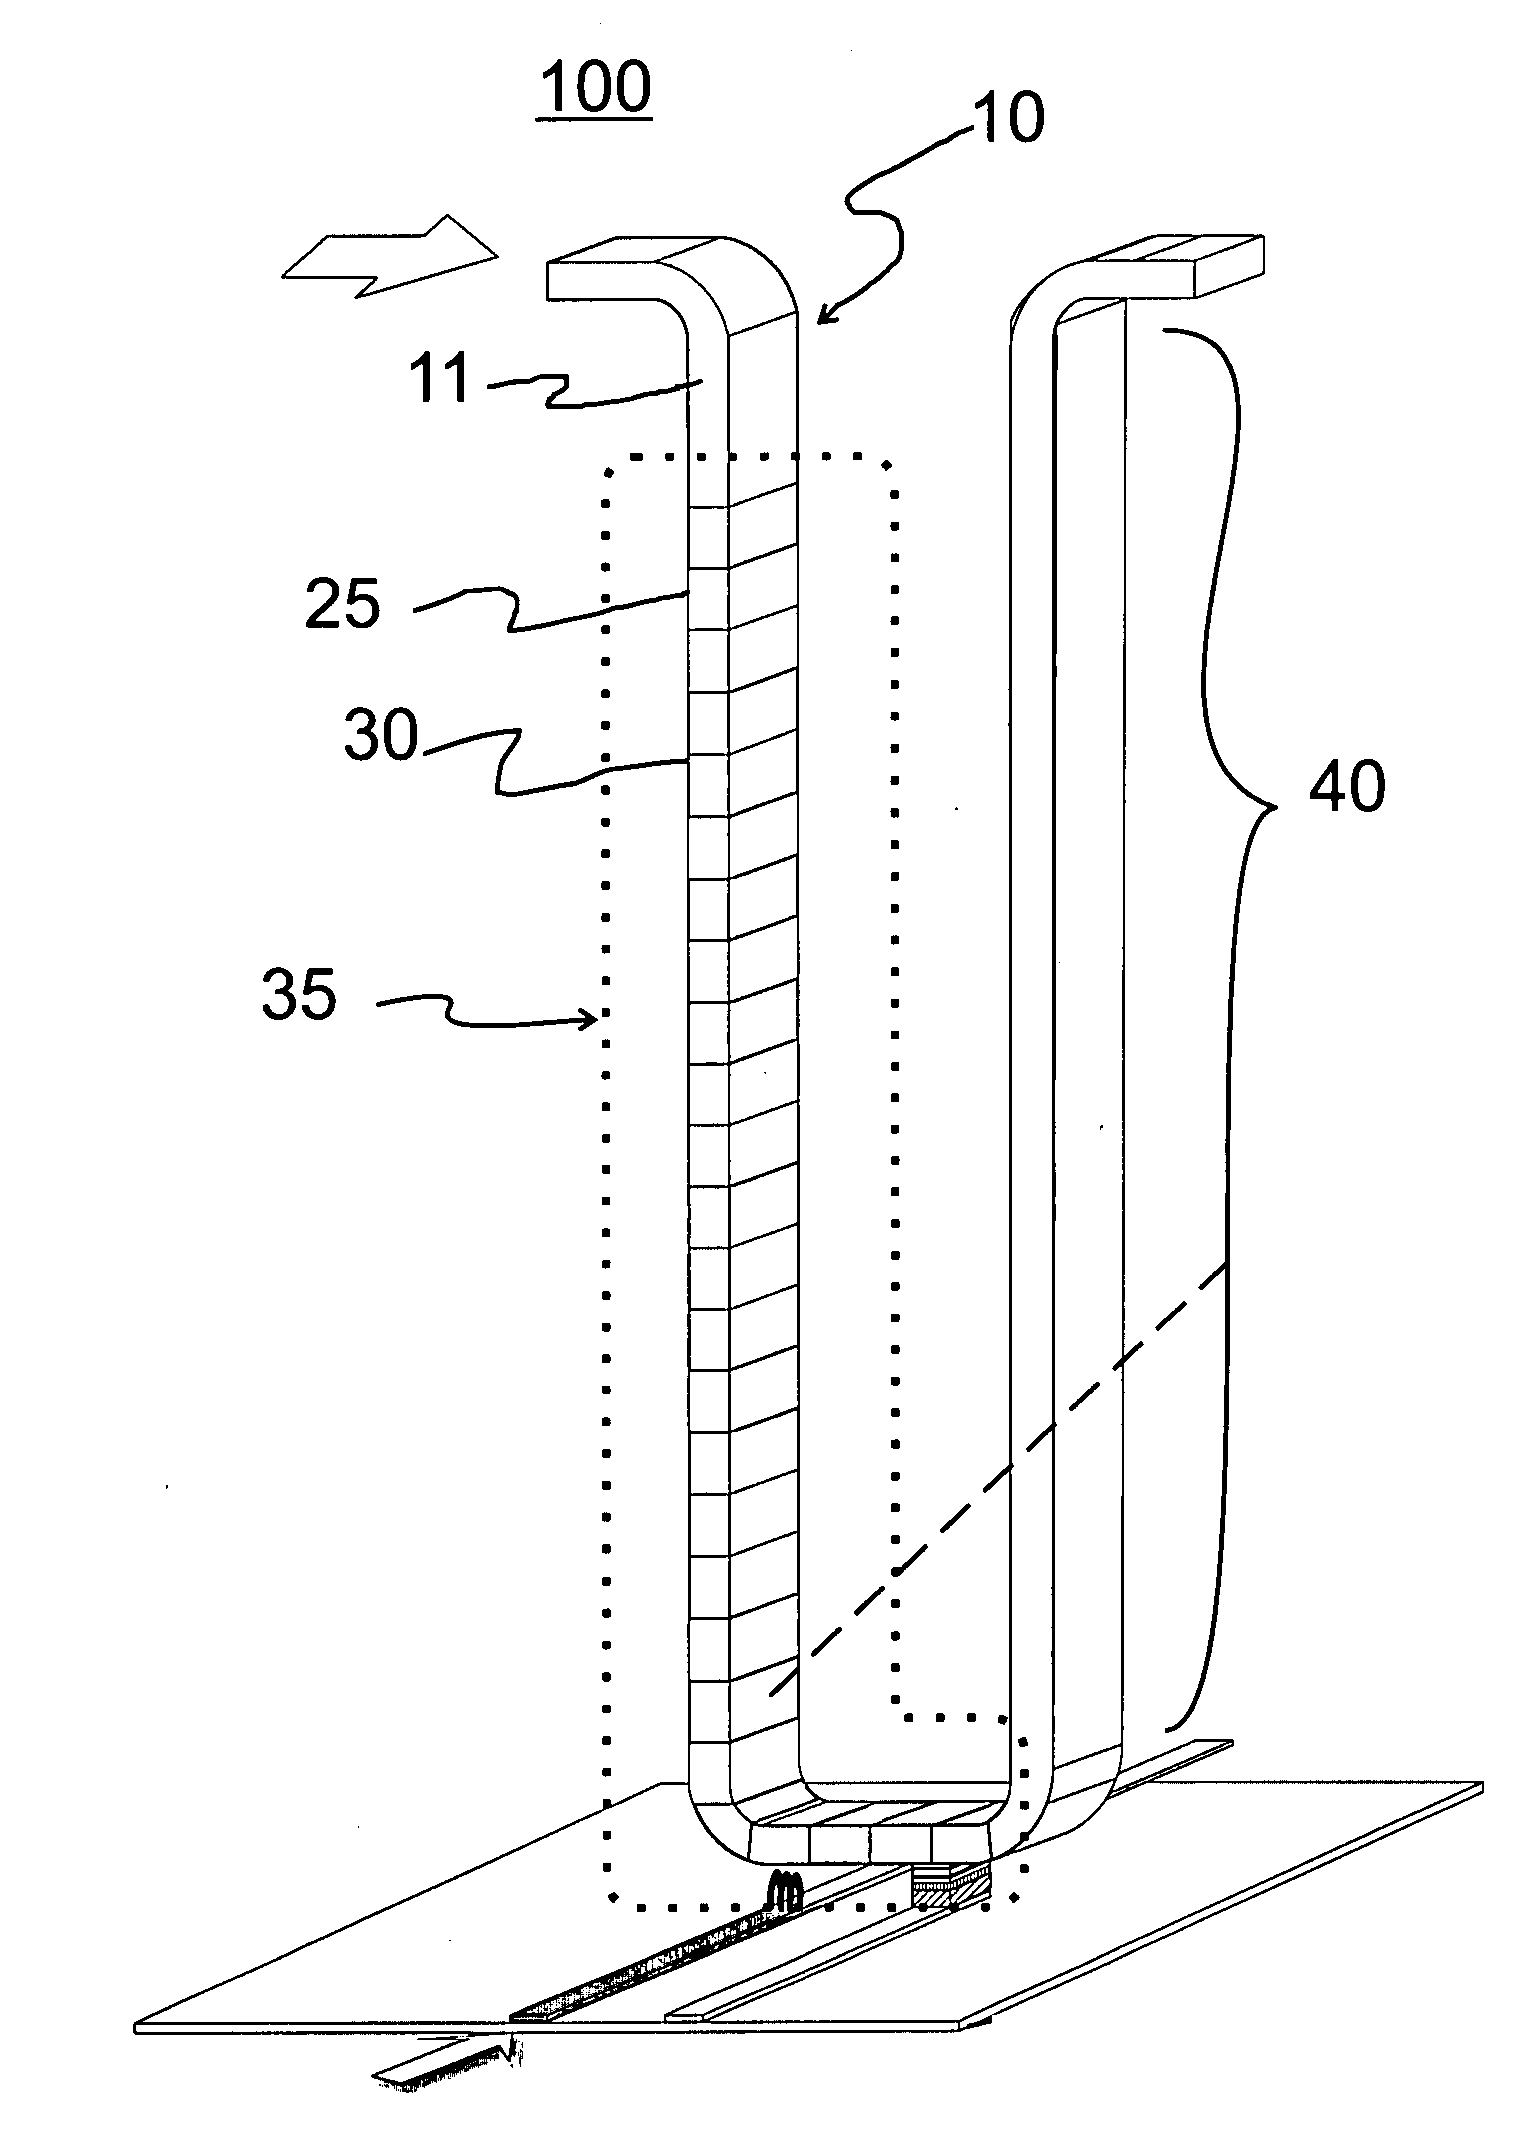 System and method for reading data stored on a magnetic shift register